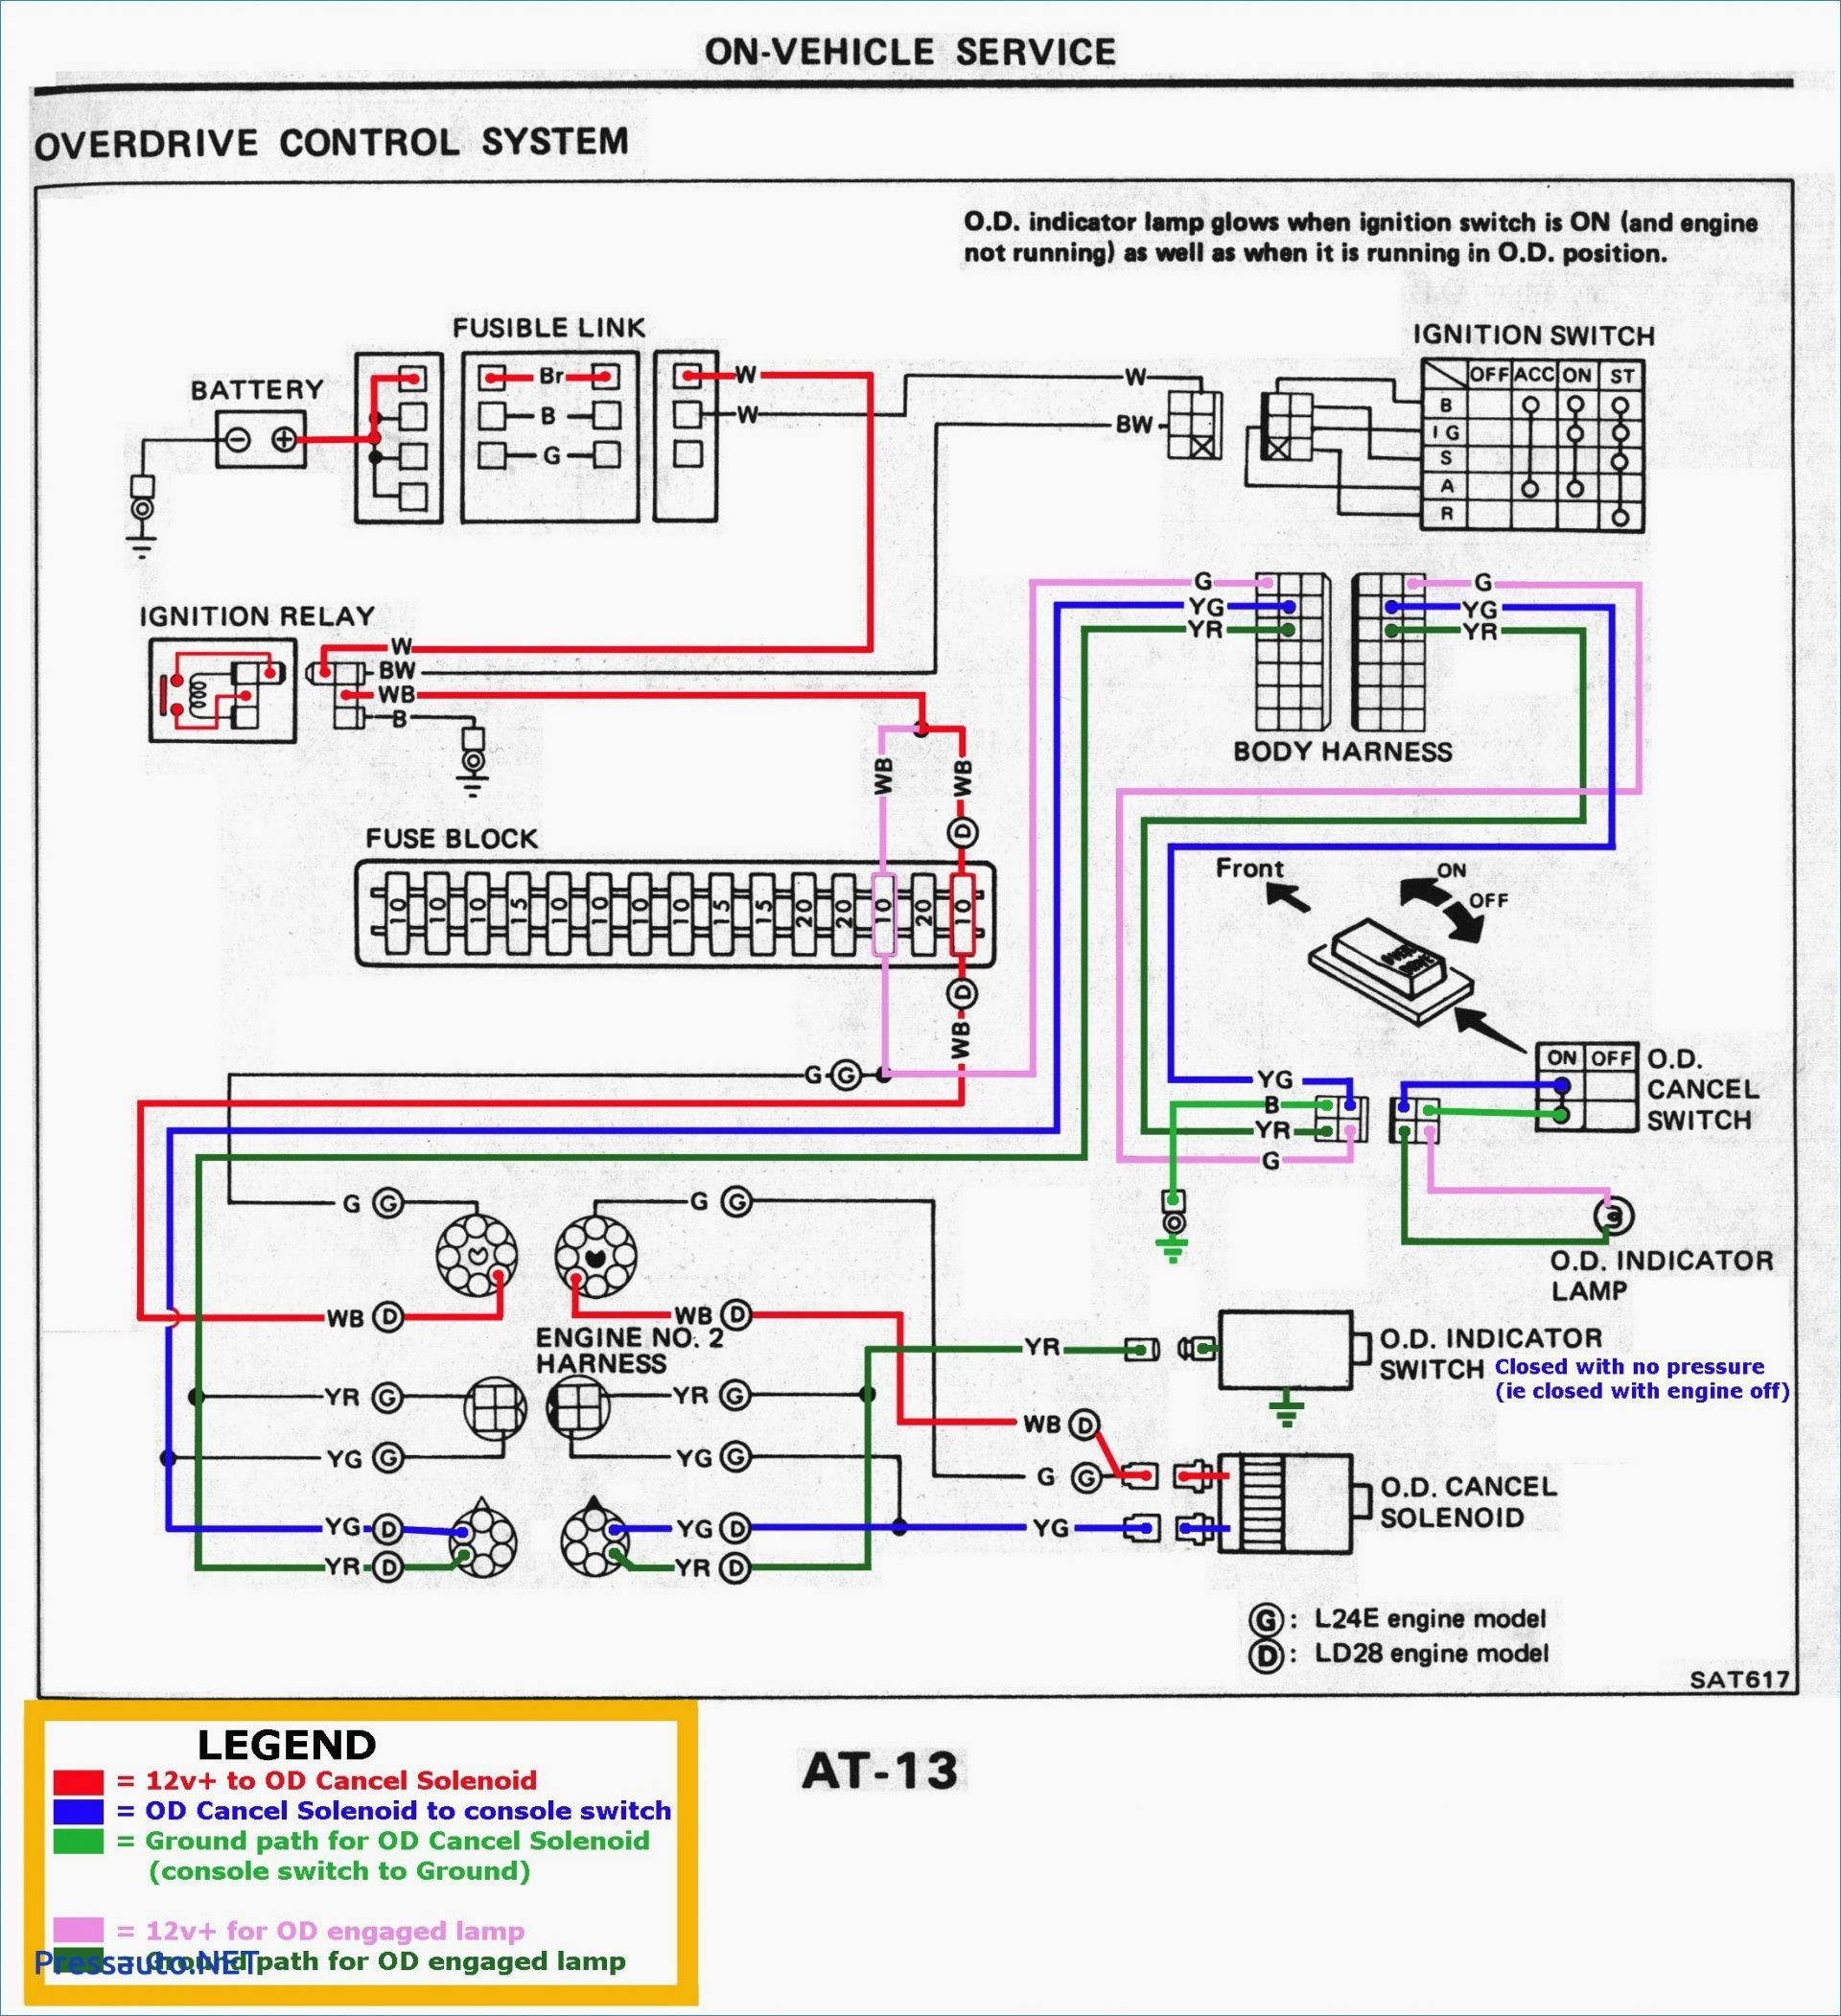 Vehicle Wiring Diagrams For Remote Starts Rate Remote Car Starter Wiring Diagram Download